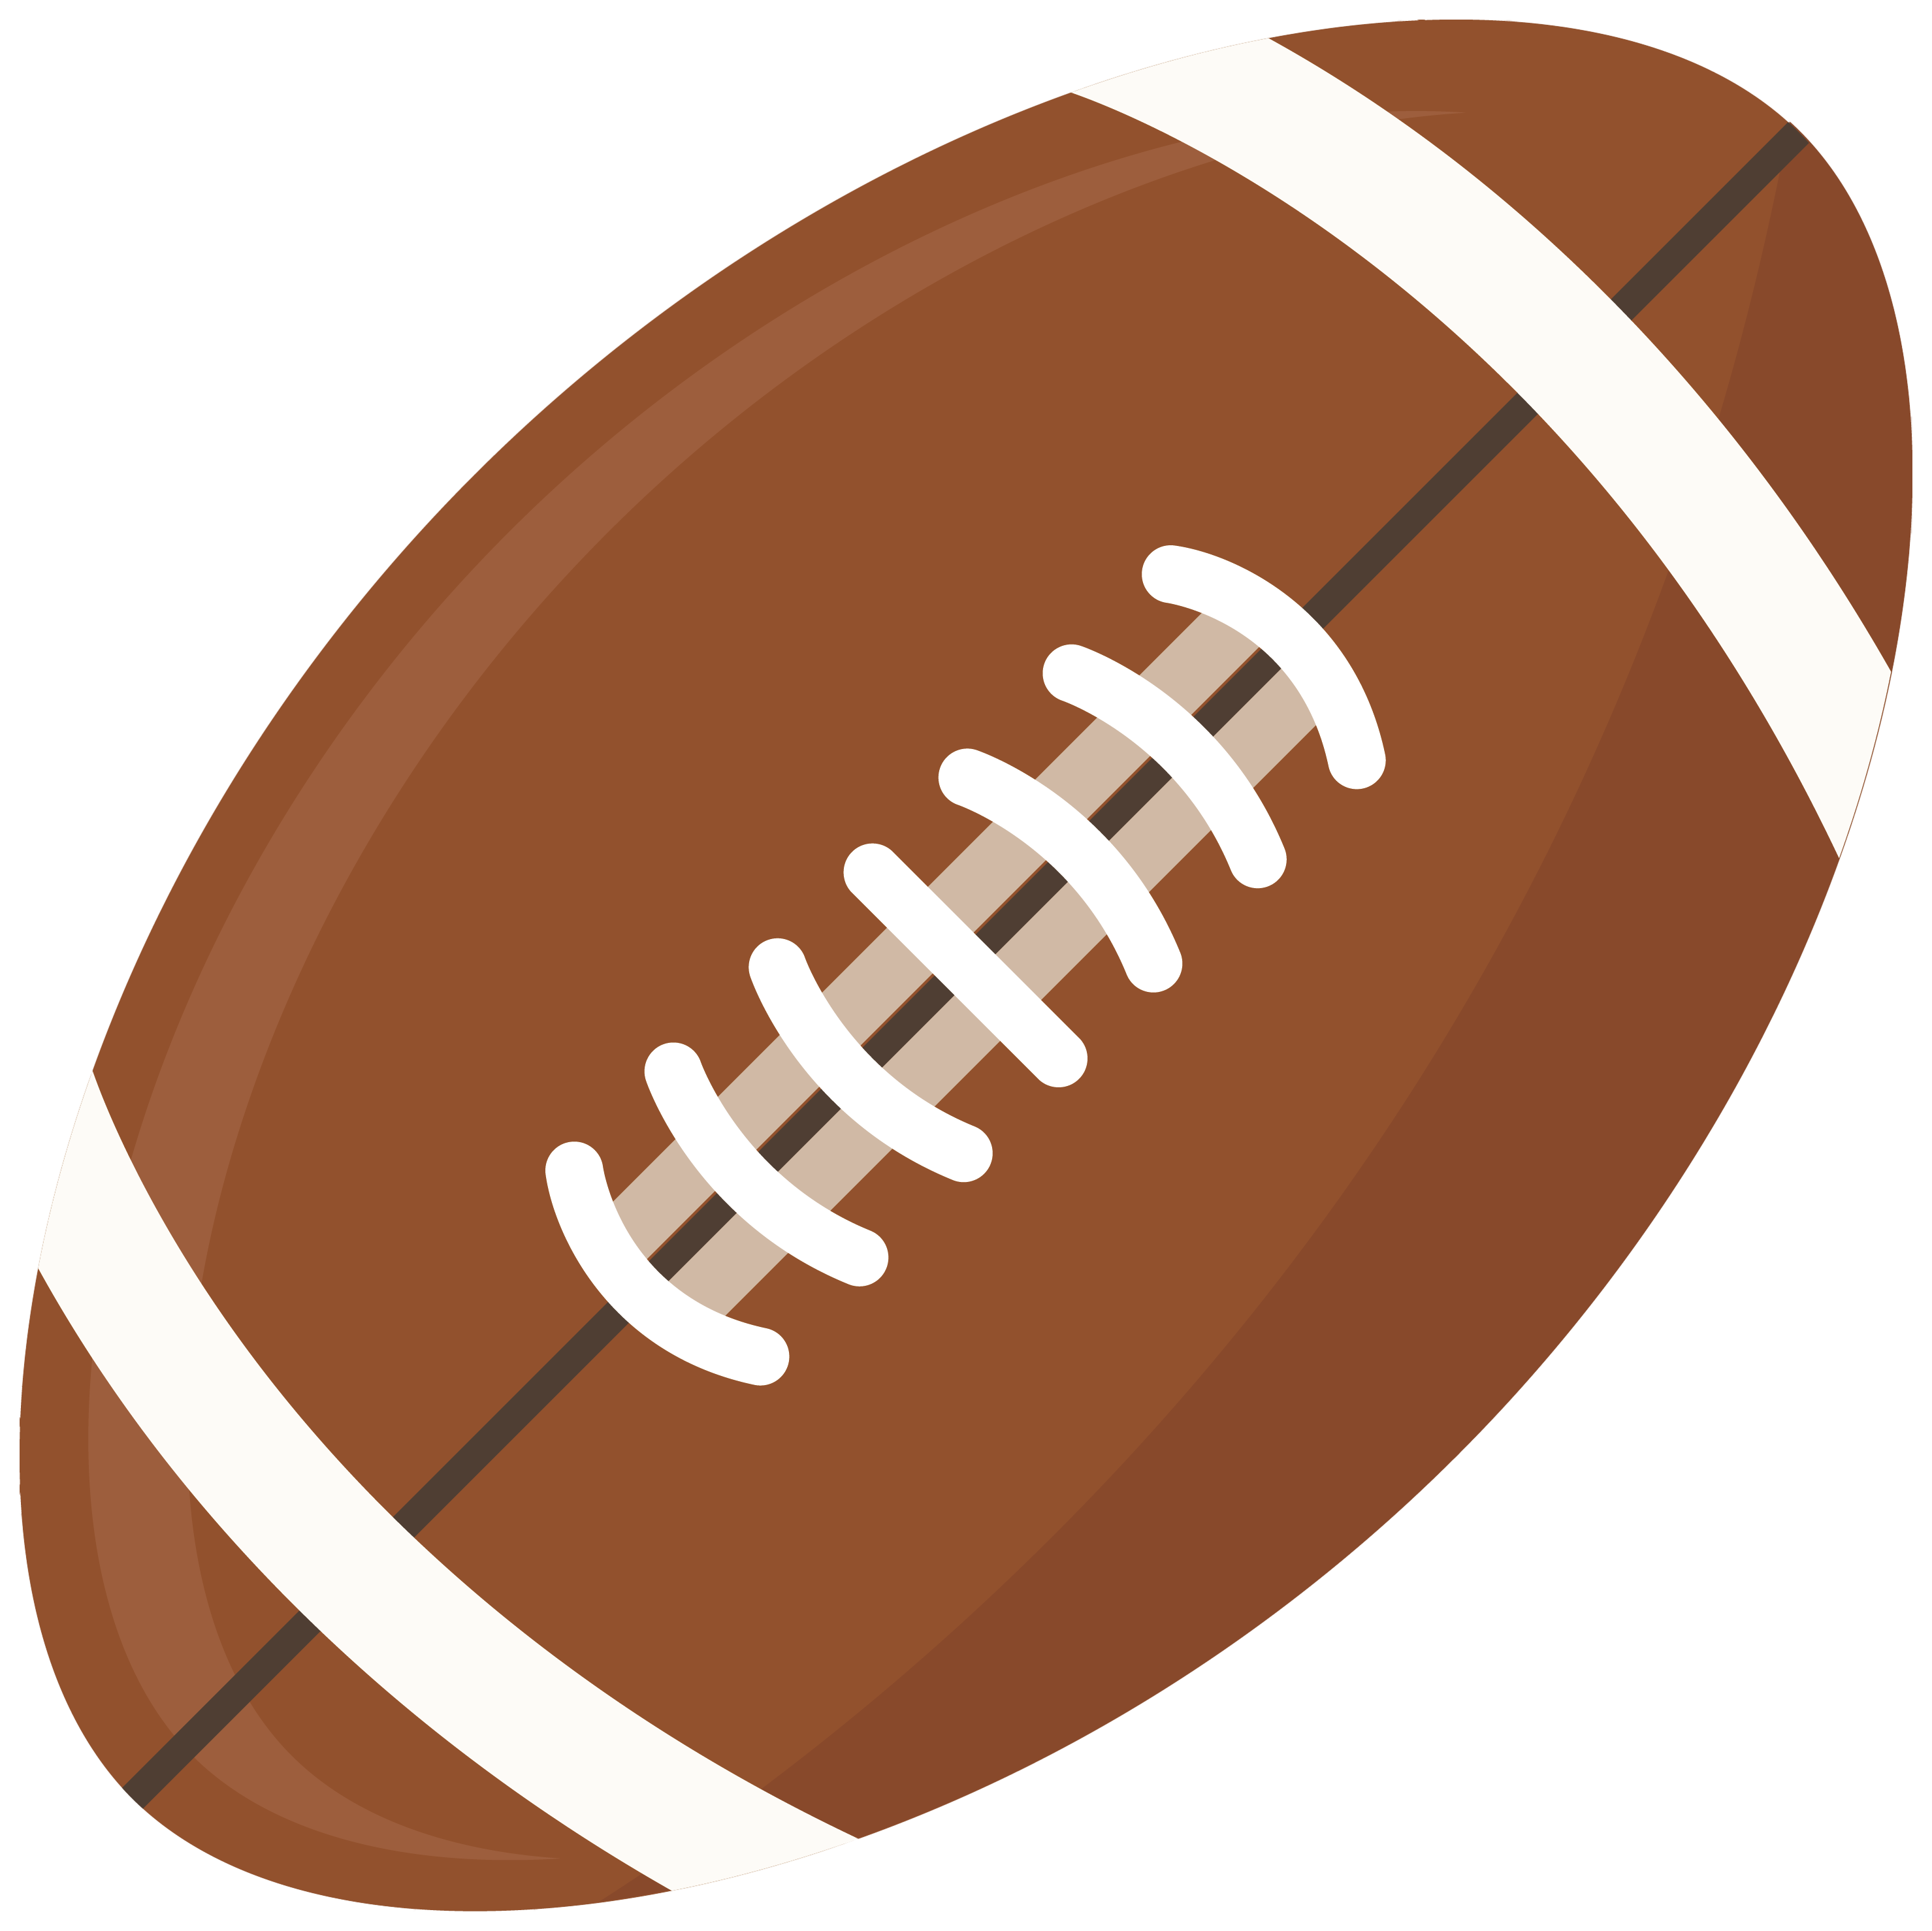 Description of American football game and ball Clipart